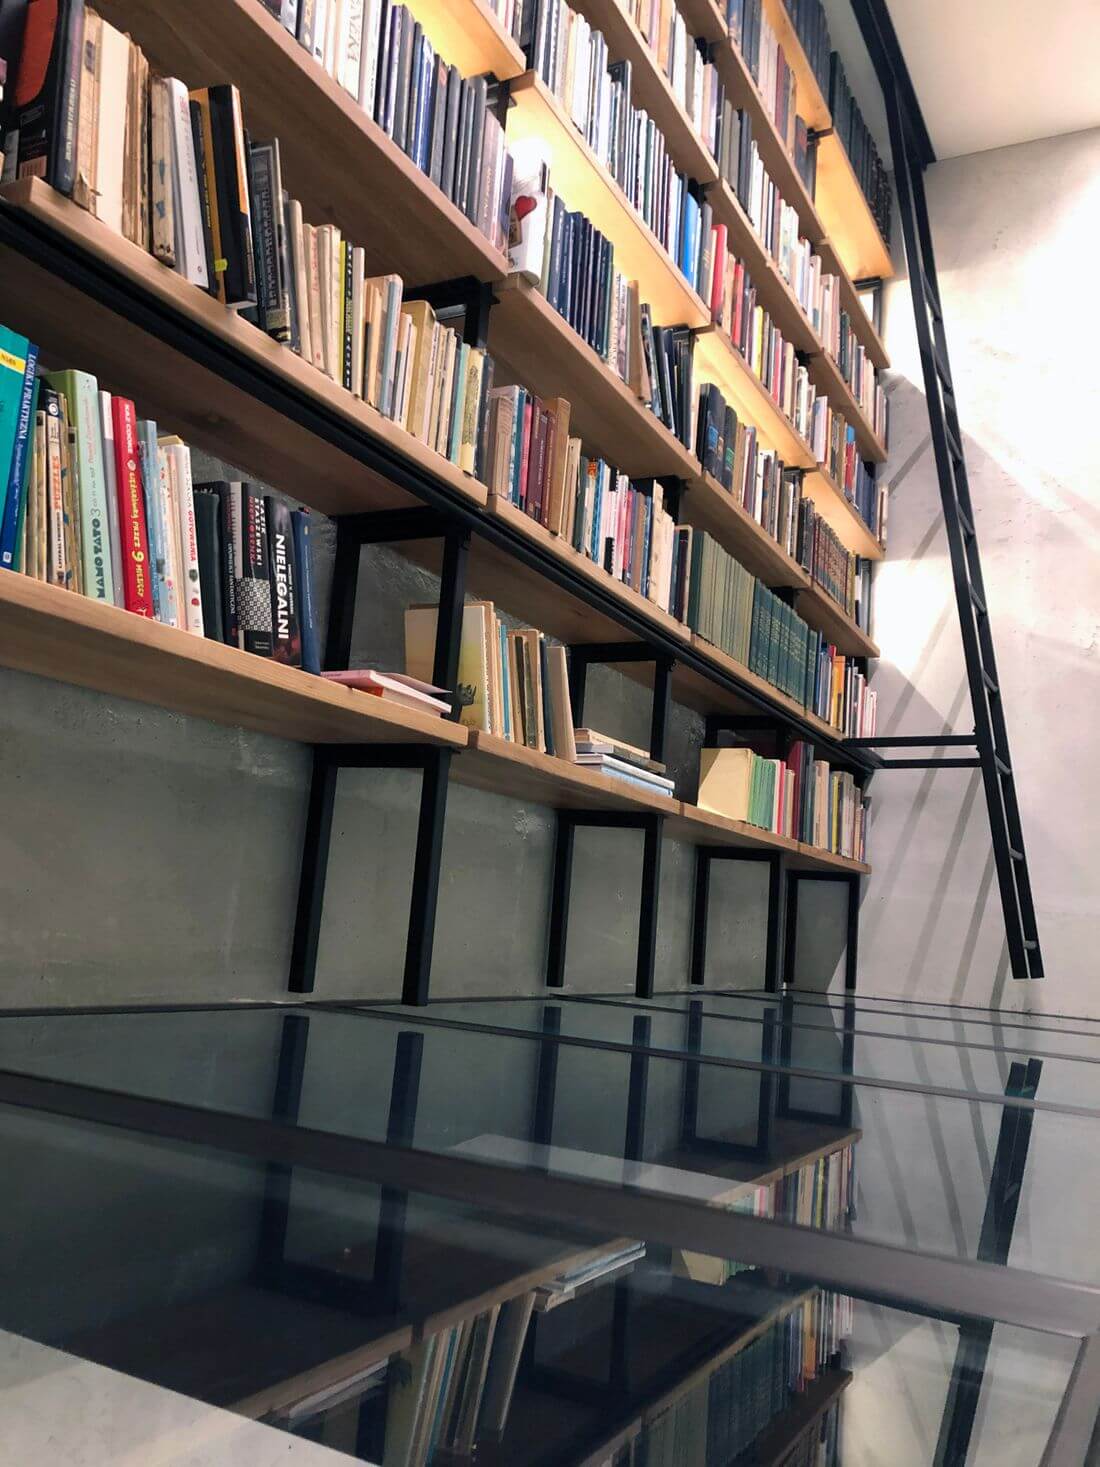 Tempered glass floor on the mezzanine Loft - Entresol Loft with a library made in loft industrial style of structural steel